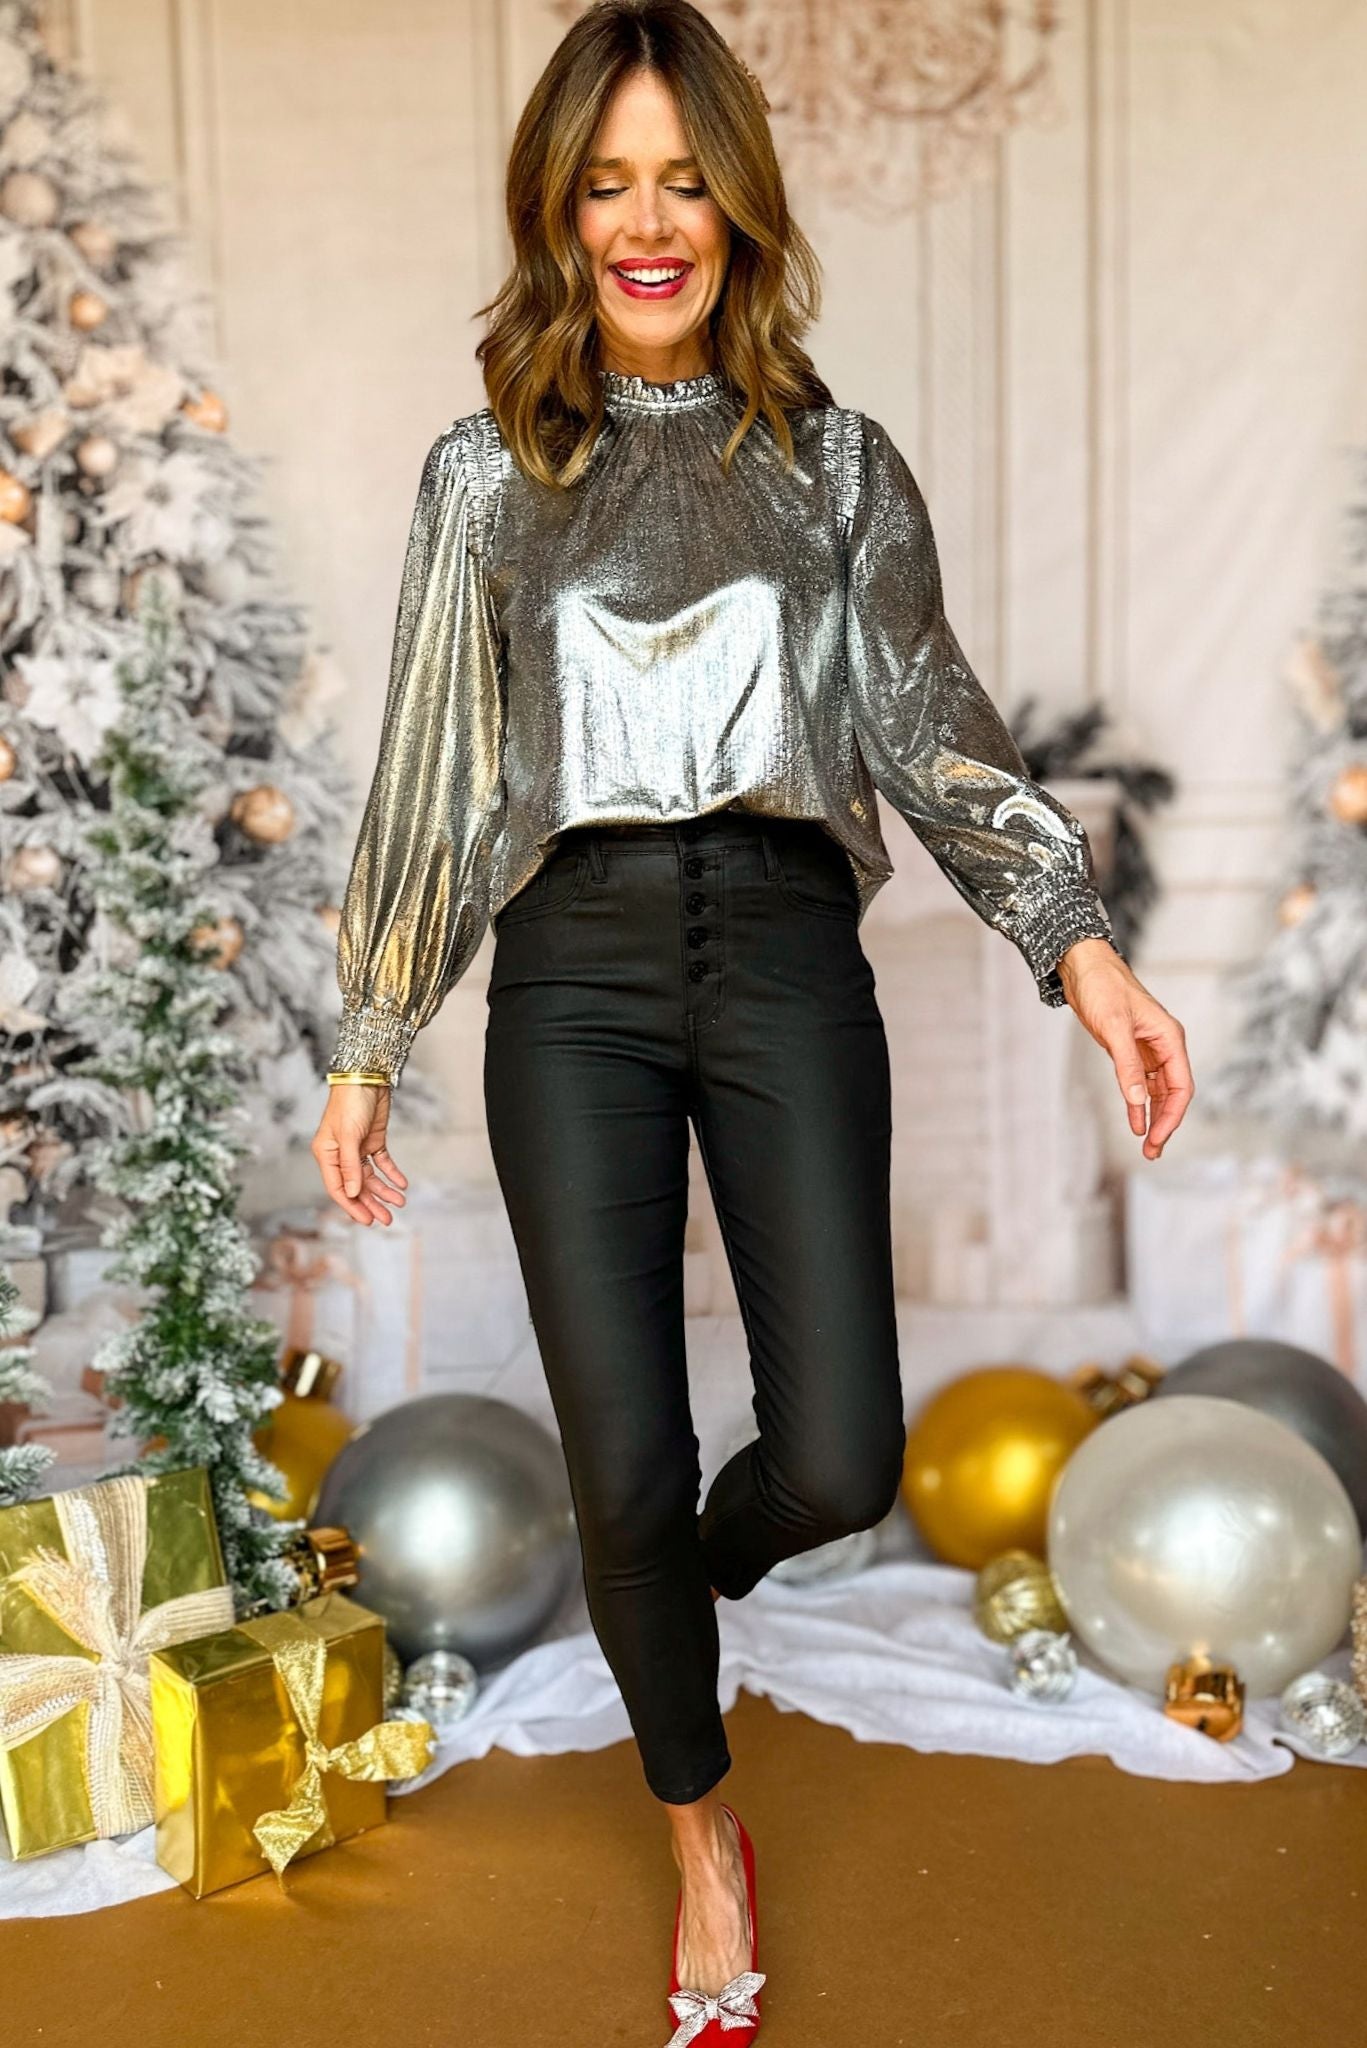 SSYS The Noelle Top In Silver, must have top, must have style, must have holiday, holiday collection, holiday fashion, elevated style, elevated top, mom style, holiday style, shop style your senses by mallory fitzsimmons